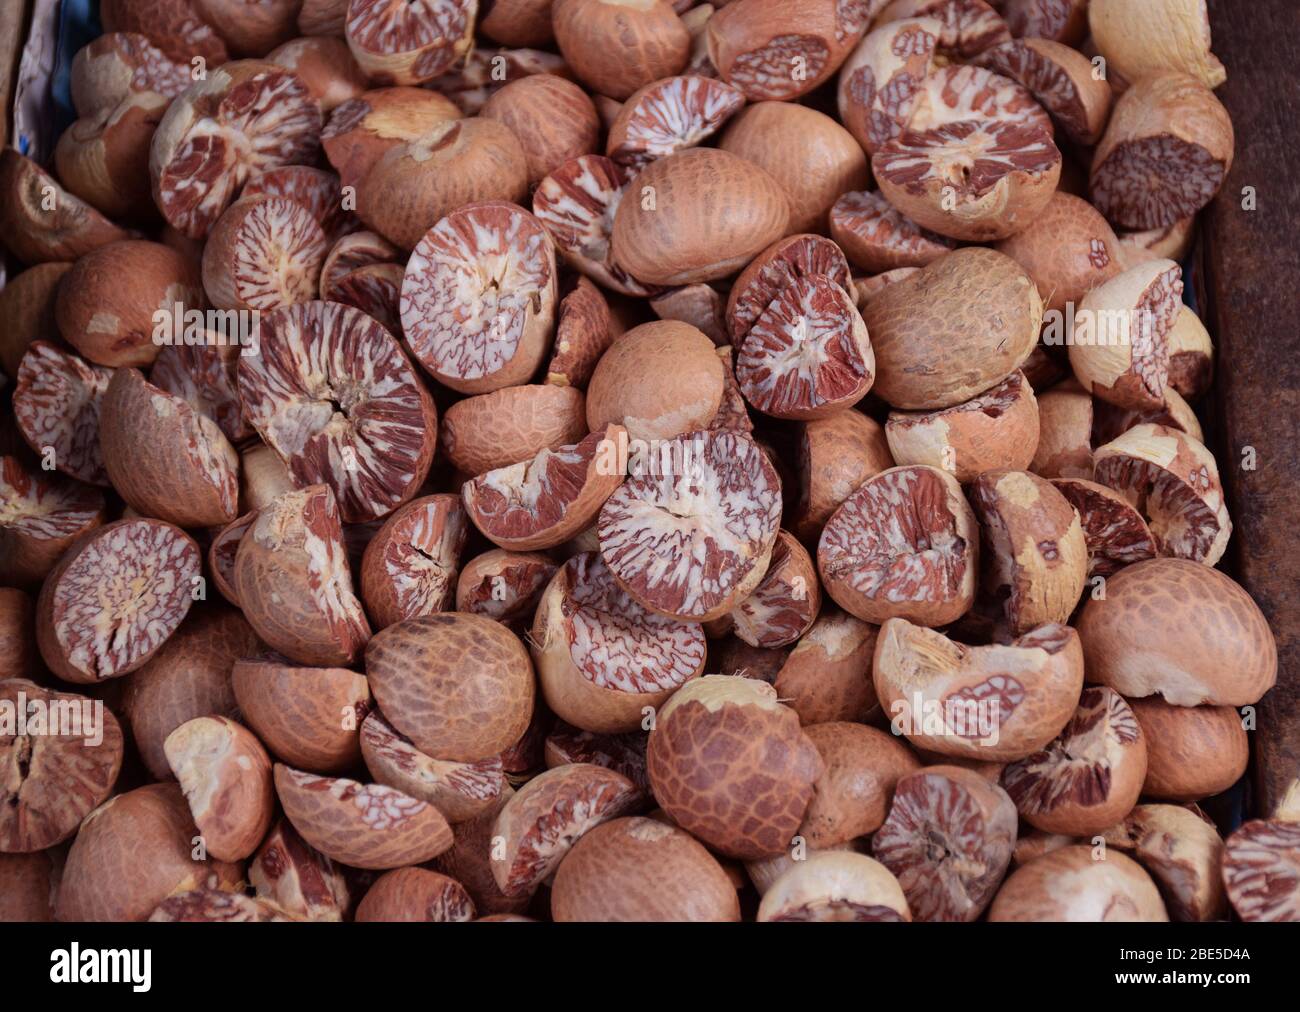 https://c8.alamy.com/comp/2BE5D4A/betel-nuts-cut-and-uncut-also-called-as-supari-in-india-2BE5D4A.jpg